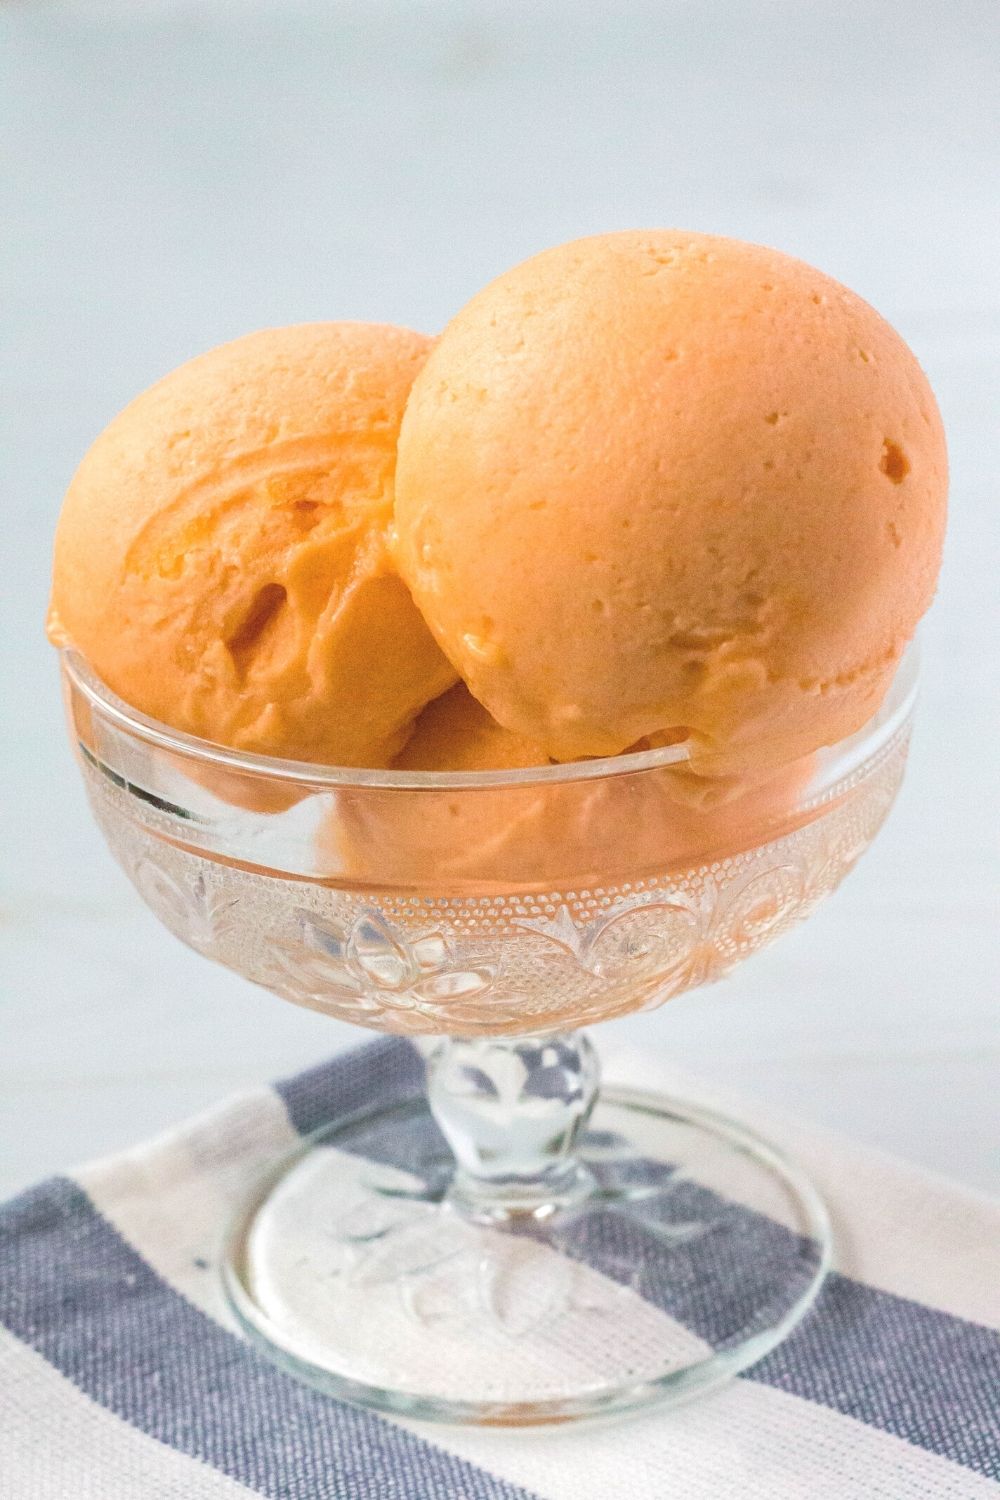 close-up side view of a glass dessert cup with scoops of orange sorbet made from Jell-O in it.